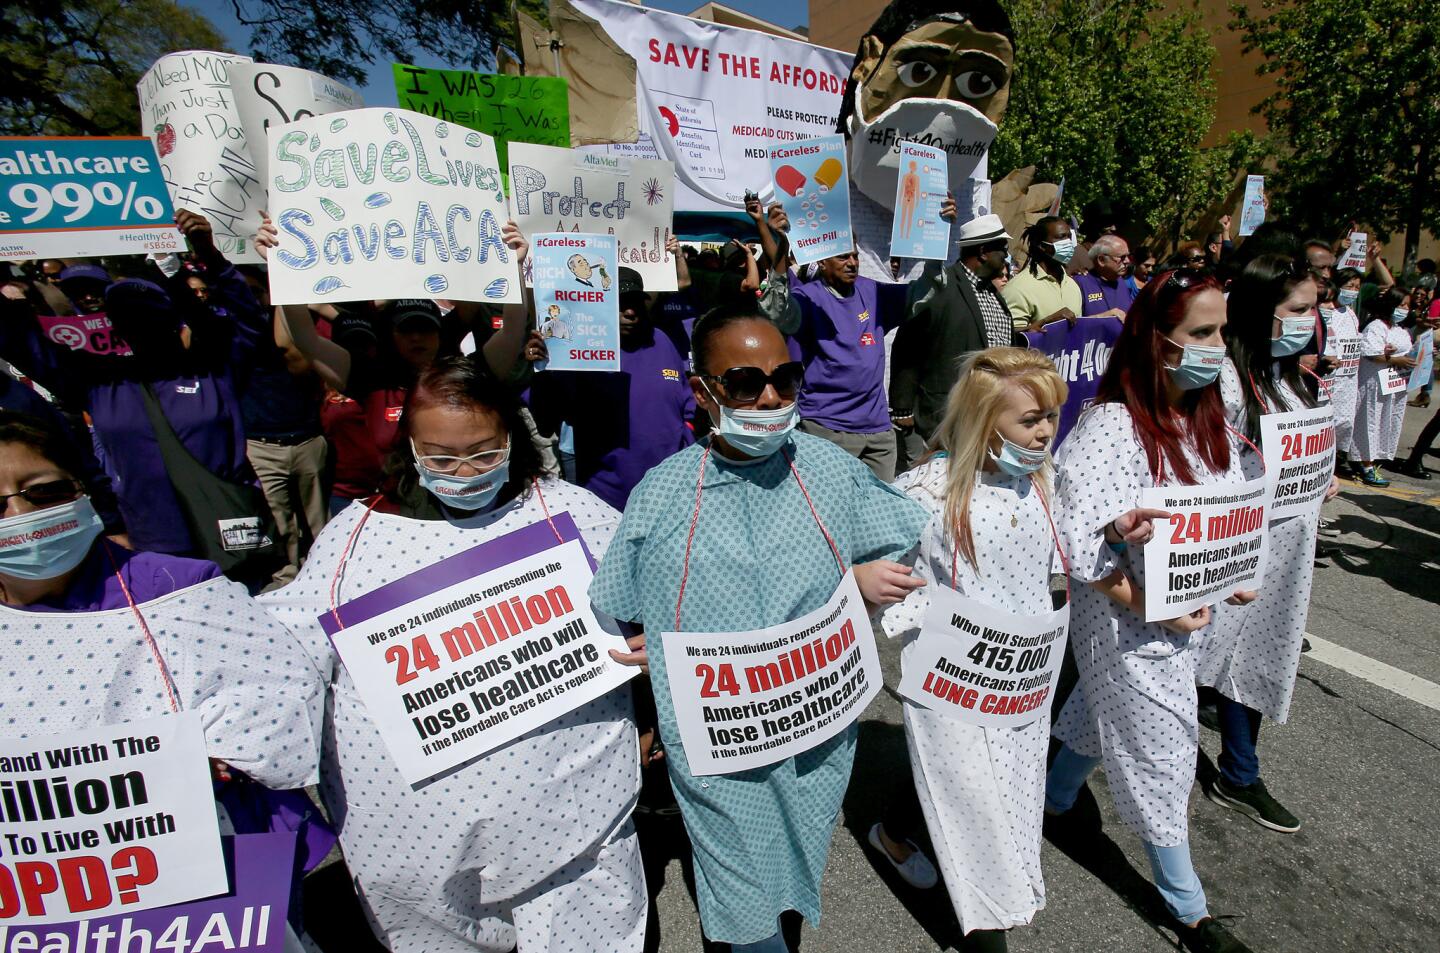 Healthcare workers and union members march down Temple Street in downtown Los Angeles on Thursday in support of the Affordable Care Act, also known as Obamacare.